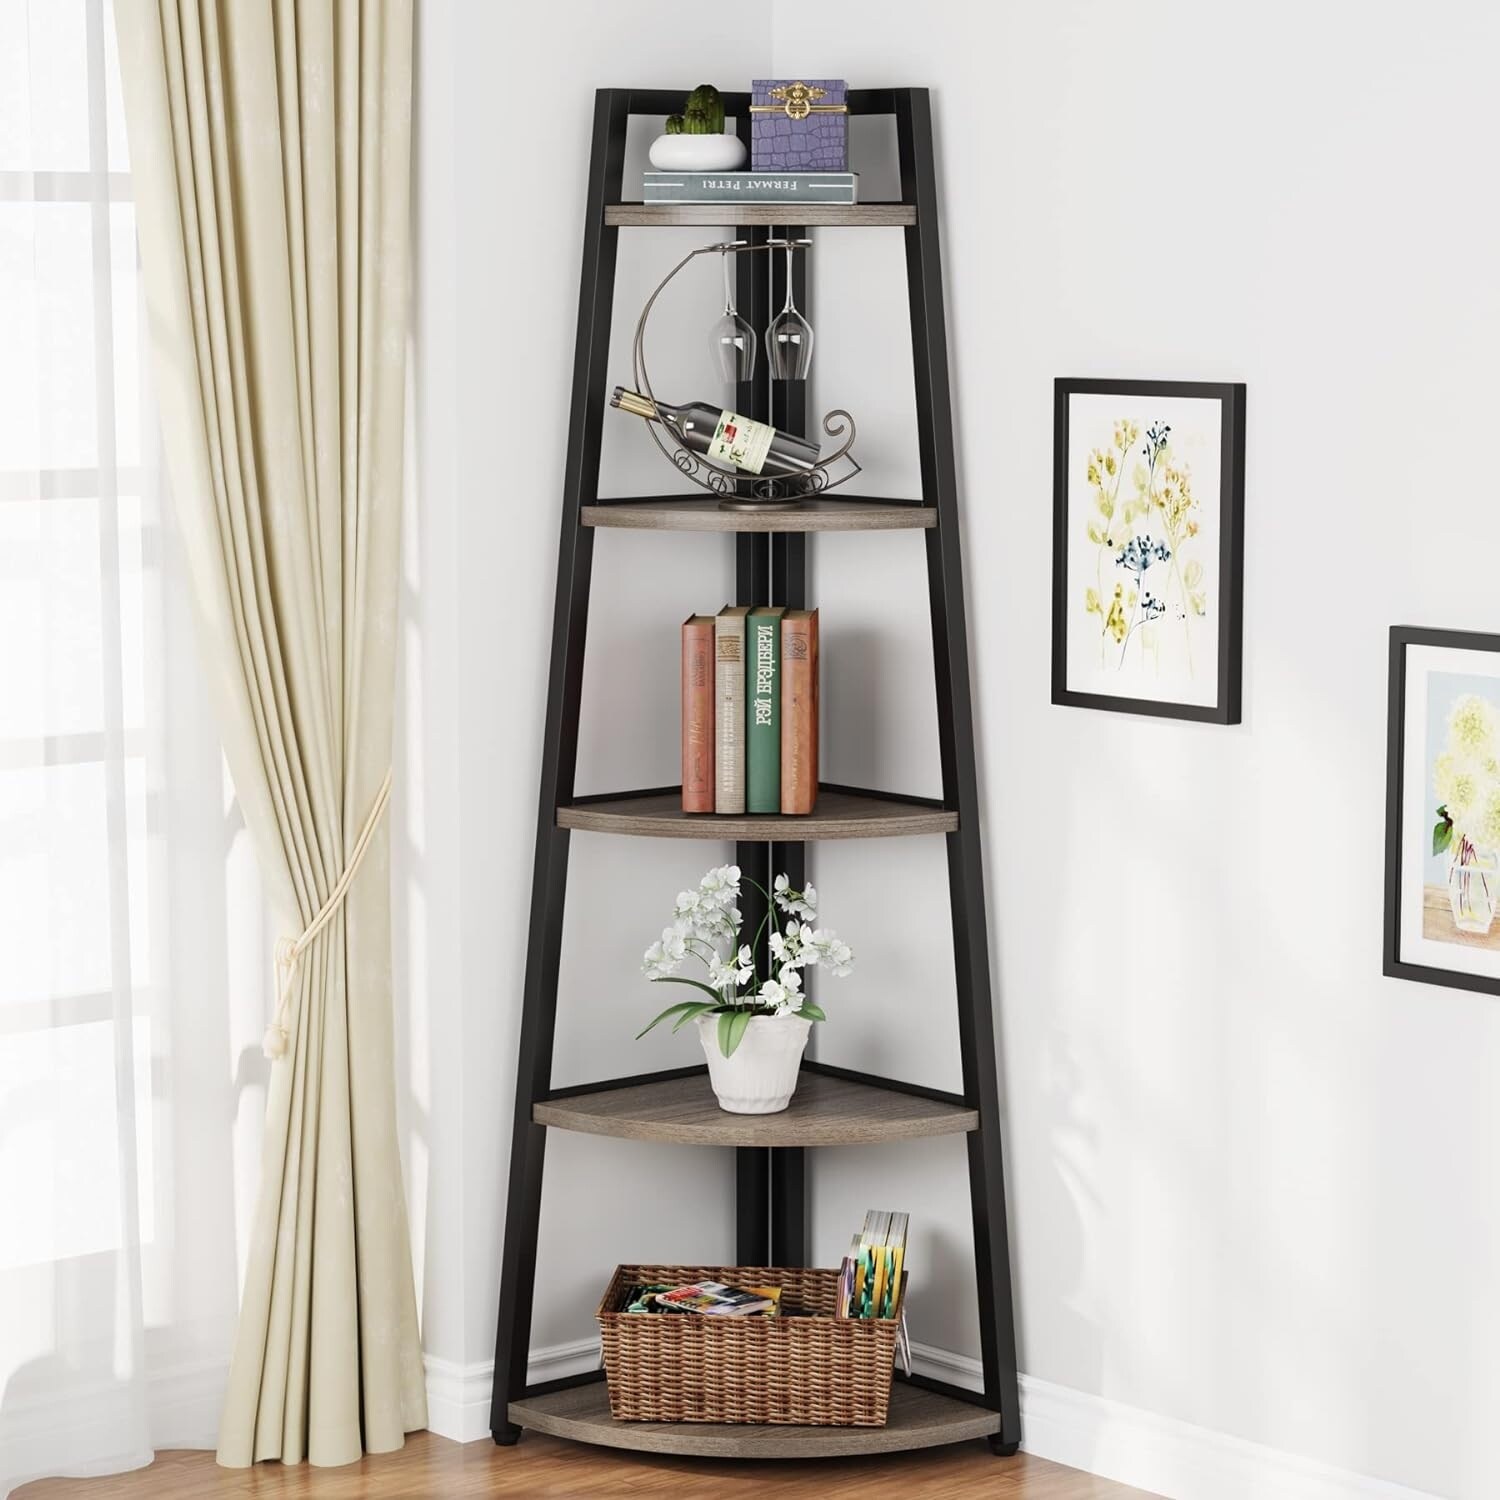 https://ak1.ostkcdn.com/images/products/is/images/direct/a6a2cbb7187686ceb1633d1a70bcf2e5a9524256/70-inch-Tall-Corner-Shelves%2C-5-Tier-Corner-Bookshelf-and-Bookcase.jpg